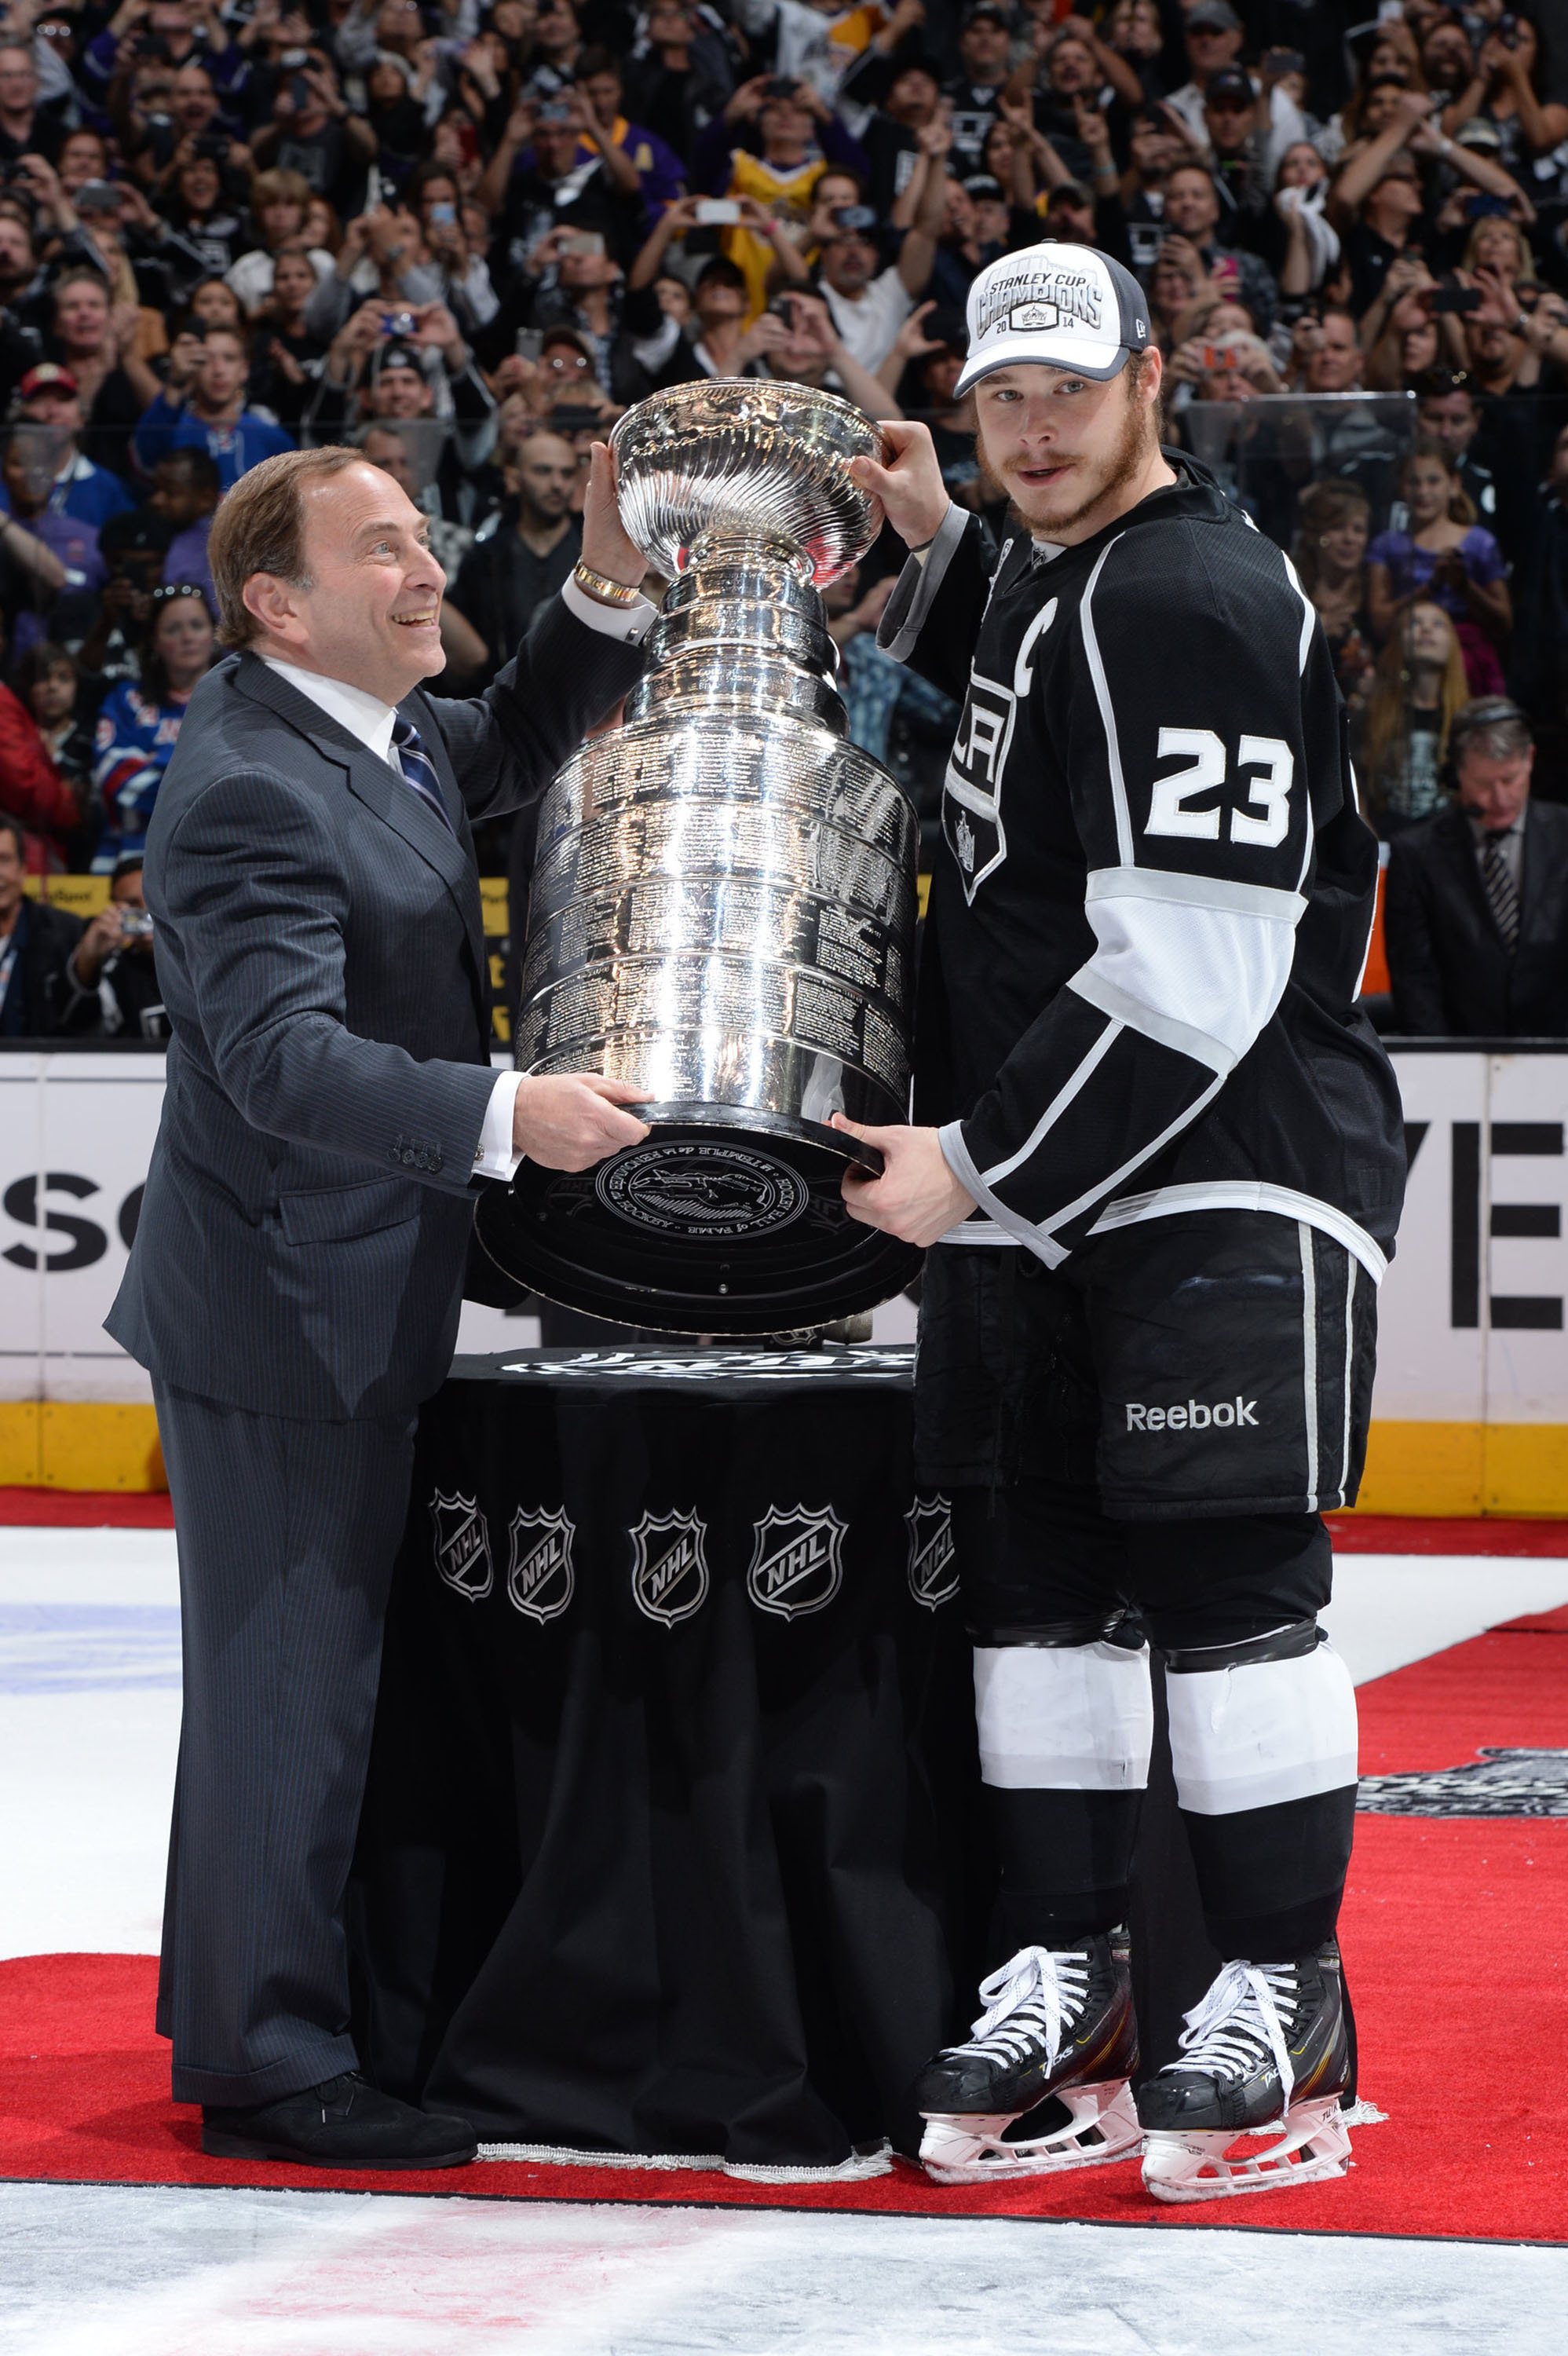 NHL Commissioner Gary Bettman, left, presenting Dustin Brown of the Los Angeles Kings with the Stanley Cup at the Staples Center in Los Angeles, June 13, 2014. (Andrew D. Bernstein/NHLI via Getty Images)